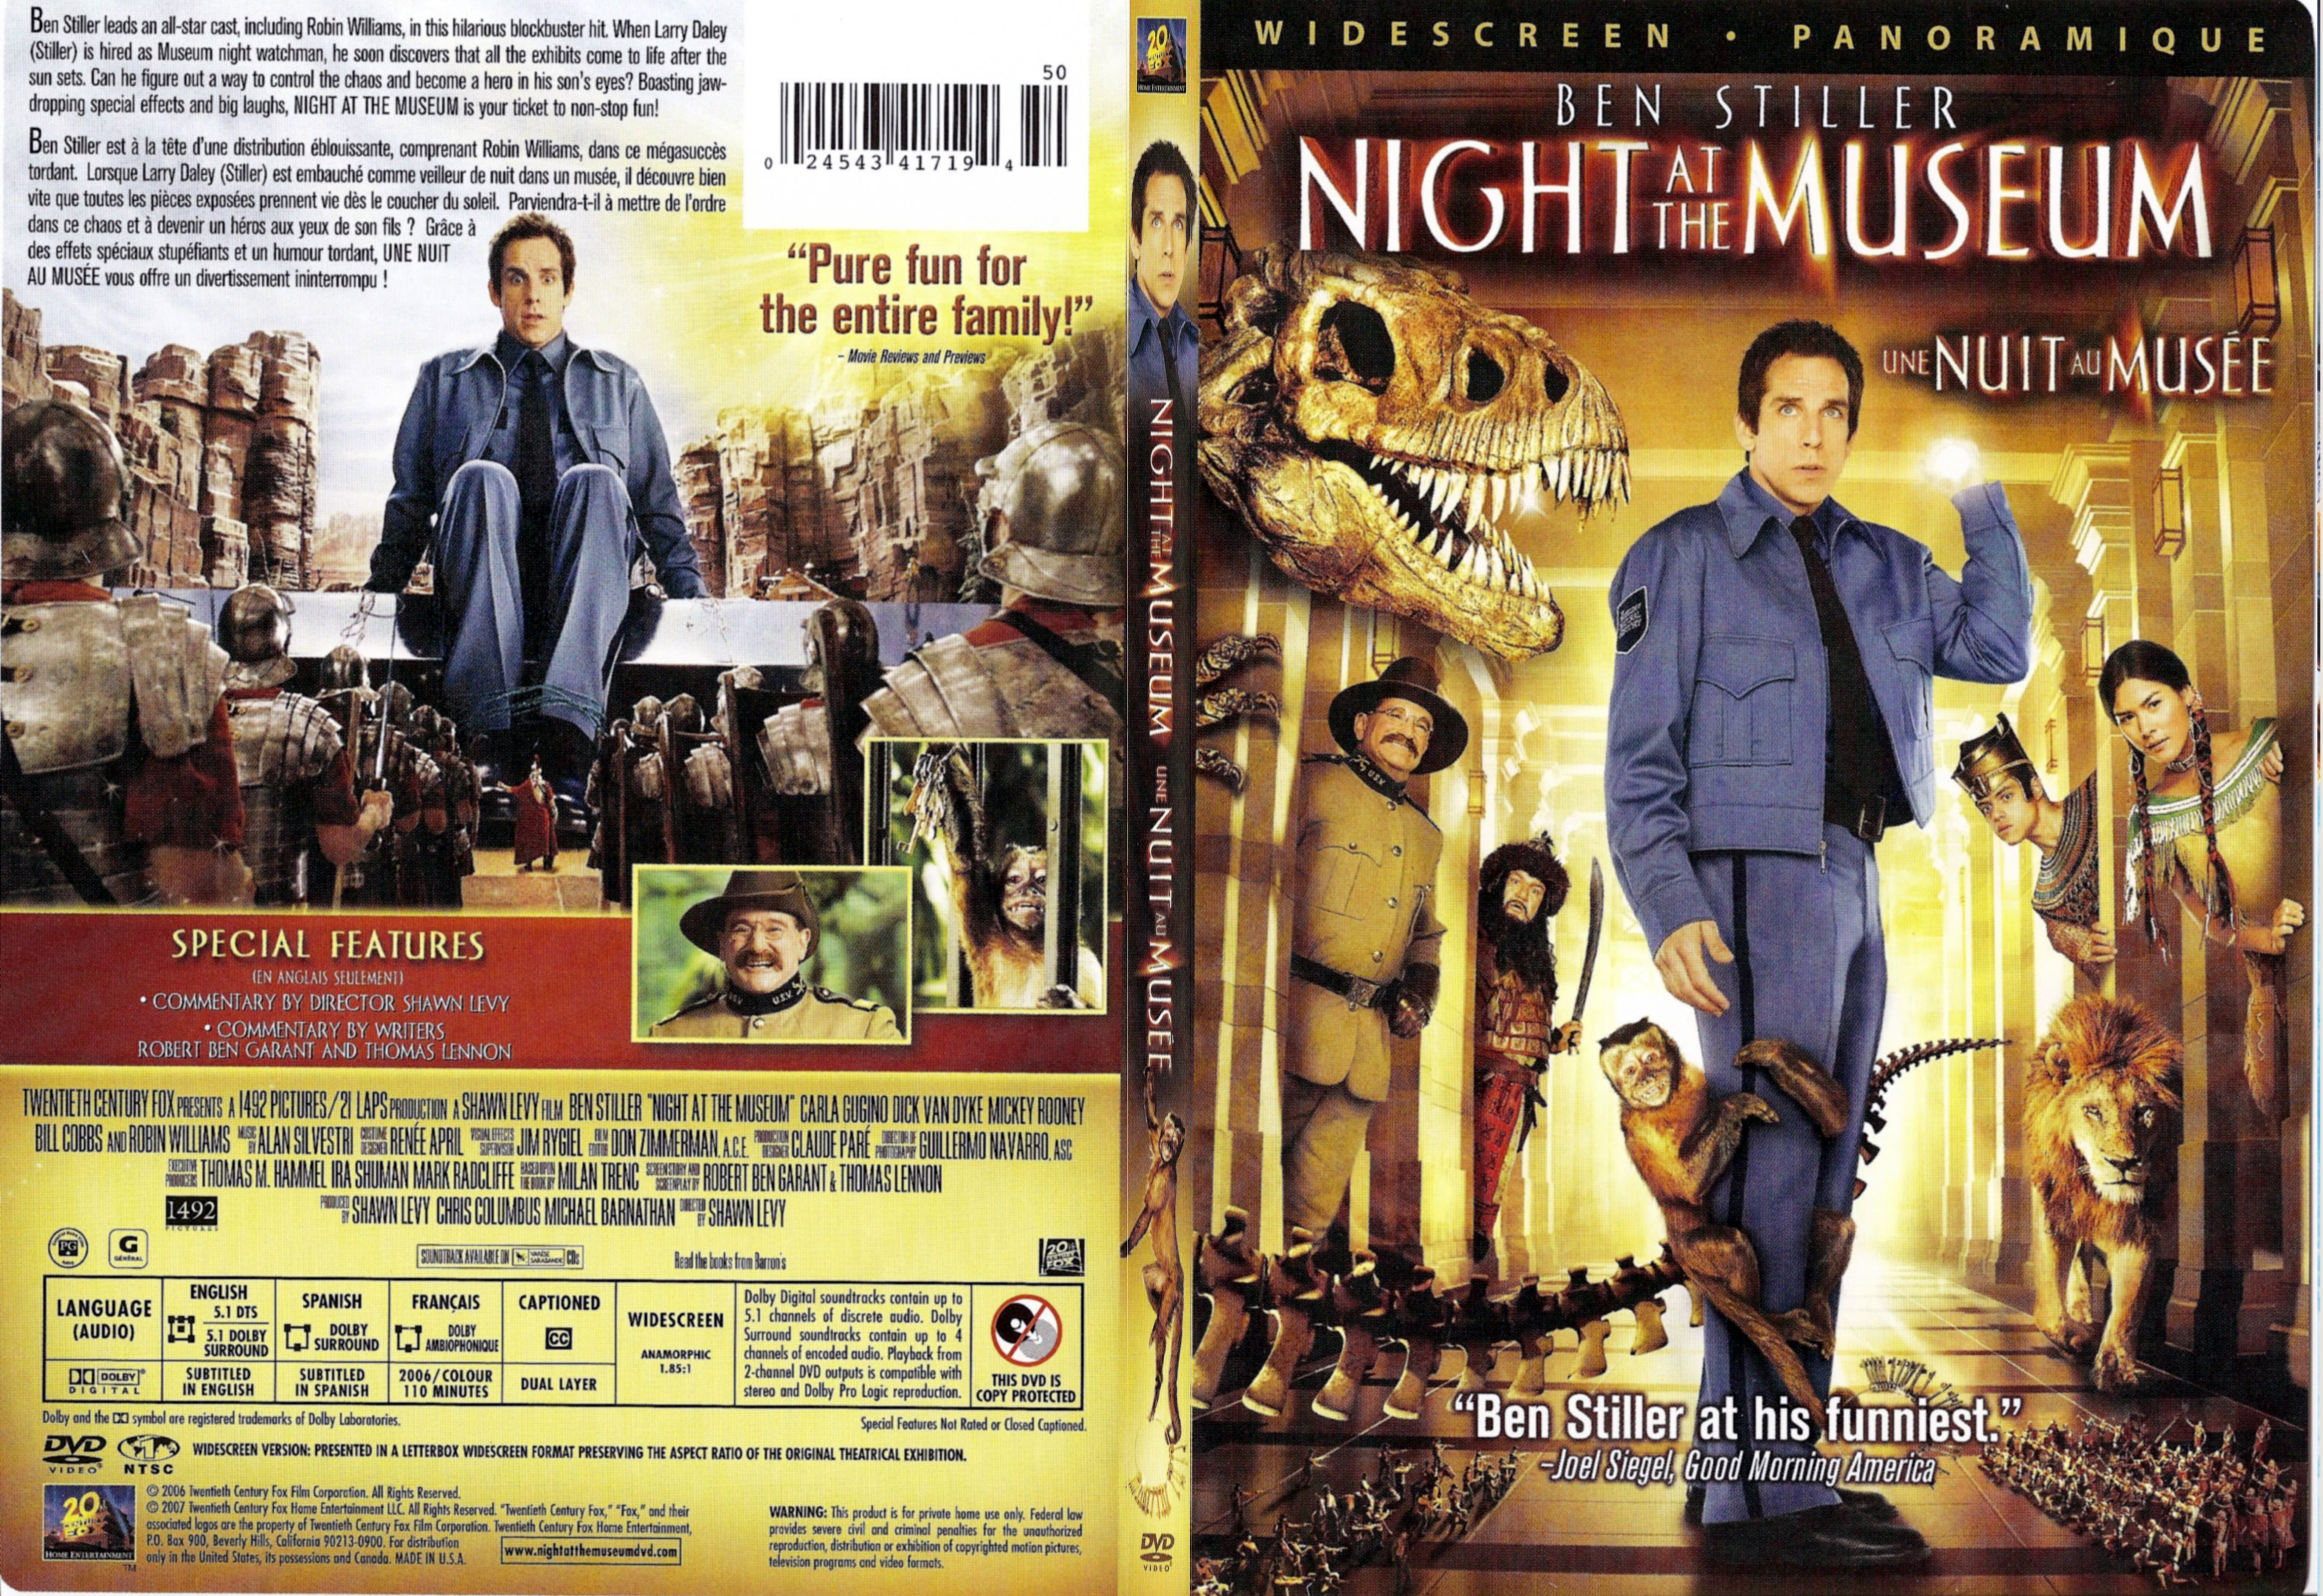 Jaquette DVD Night at the Museum - Une nuit au muse - SLIM